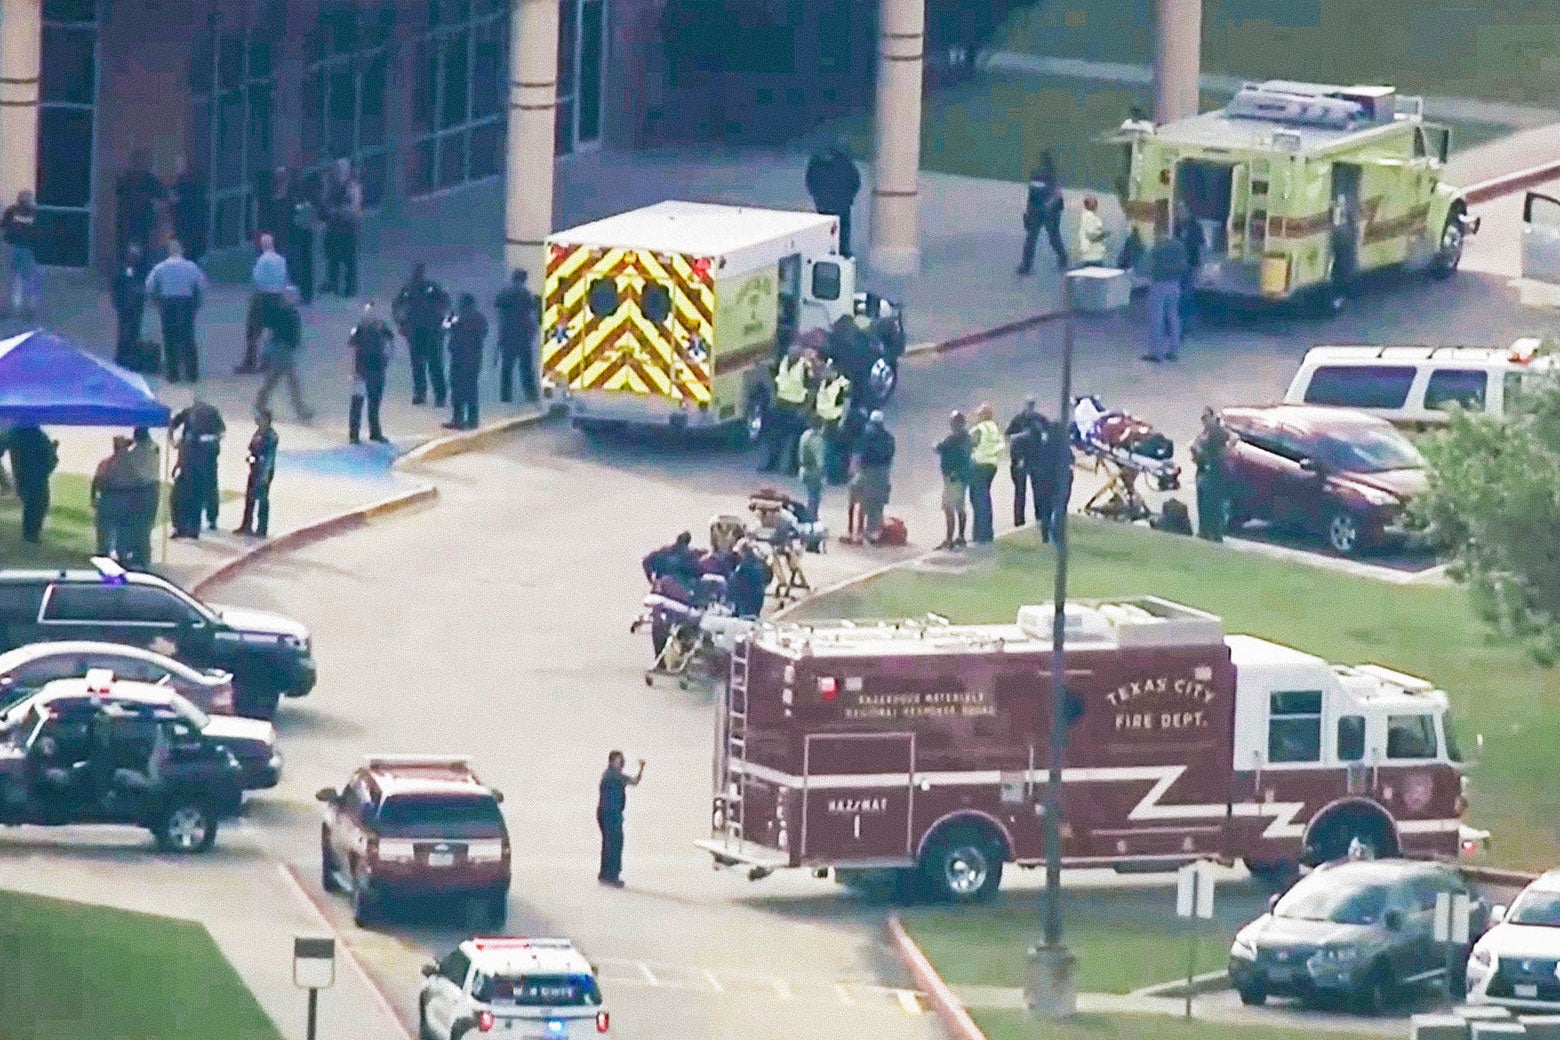 A fire truck, ambulances, and police cars outside a high school as seen from a helicopter.